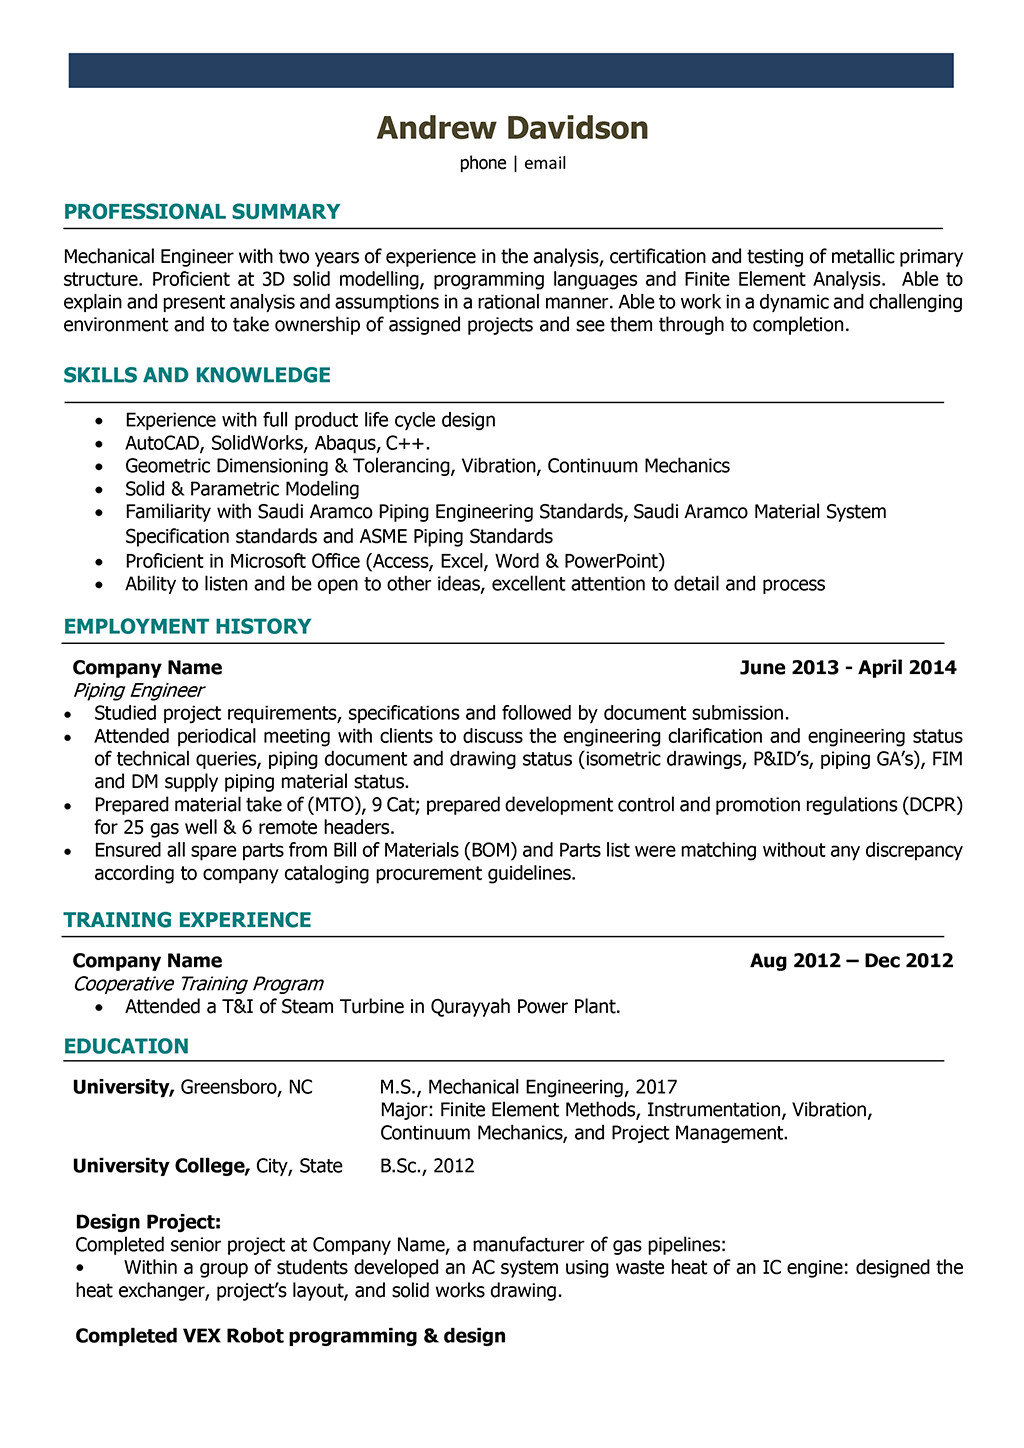 Mechanical Engineer Resume Samples and Writing Guide [10